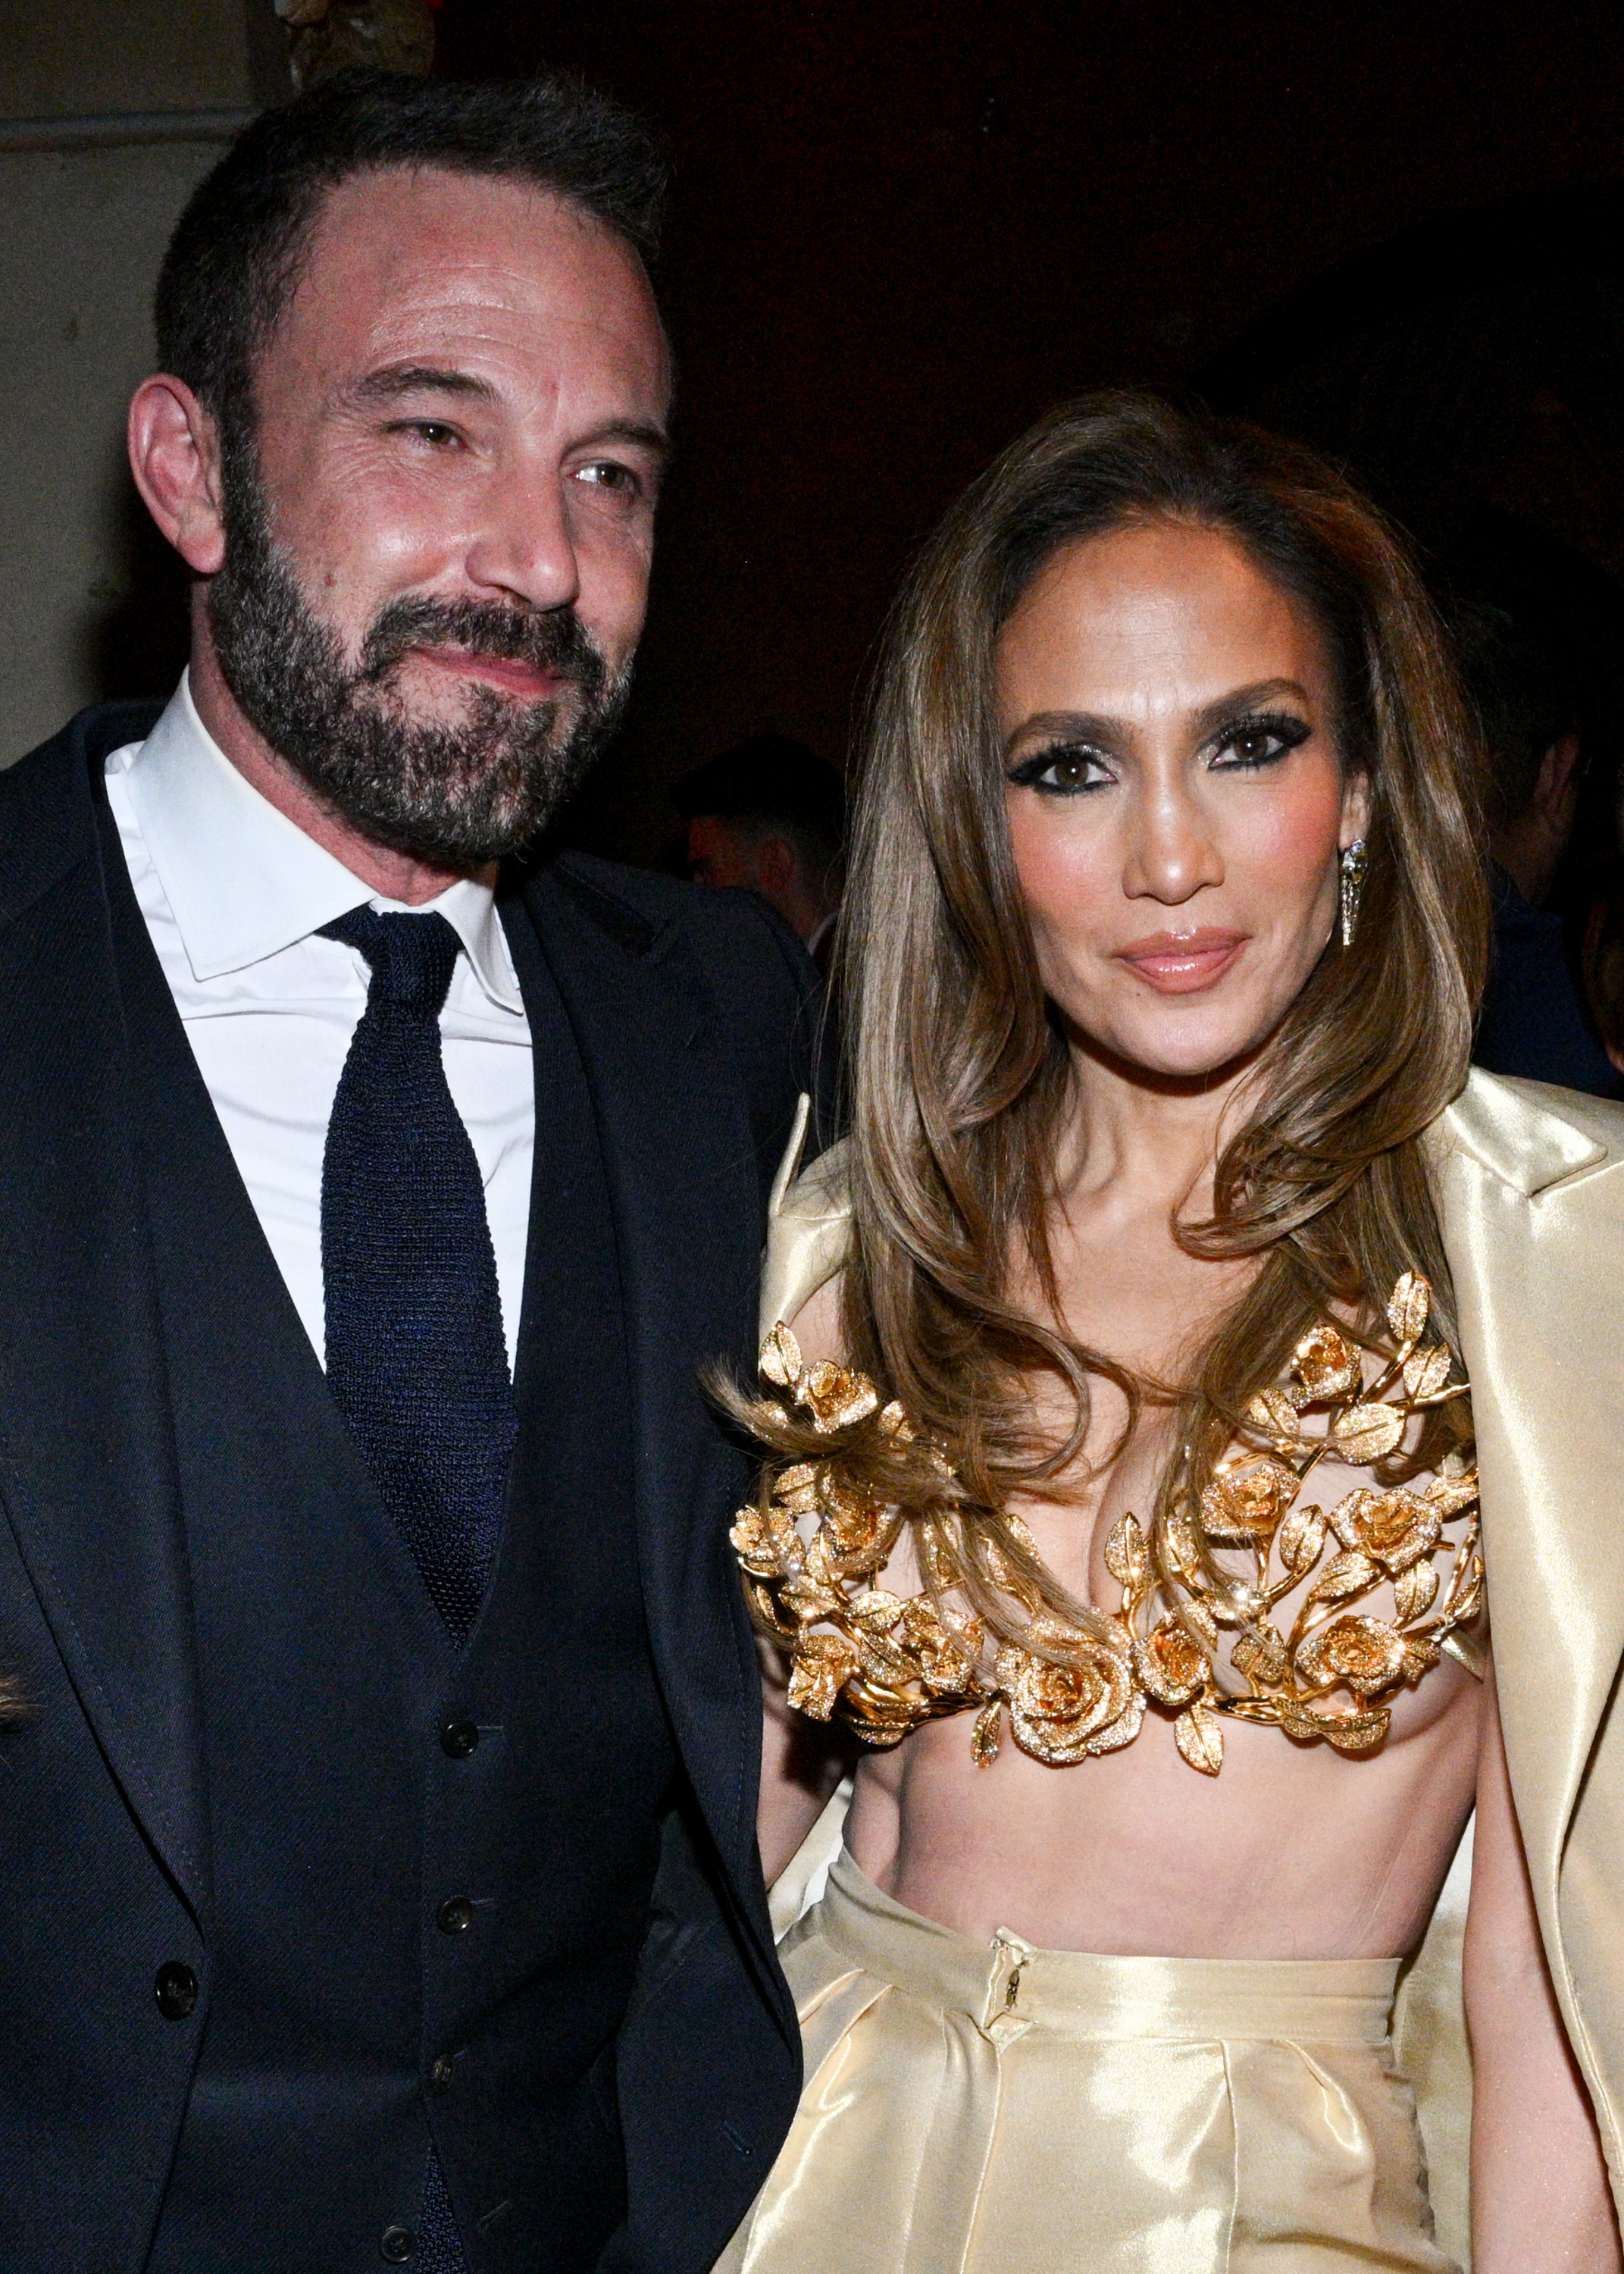 Ben Affleck and Jennifer Lopez at the premiere party for "This Is Me... Now: A Love Story" in Los Angeles, California on February 13, 2024 | Source: Getty Images